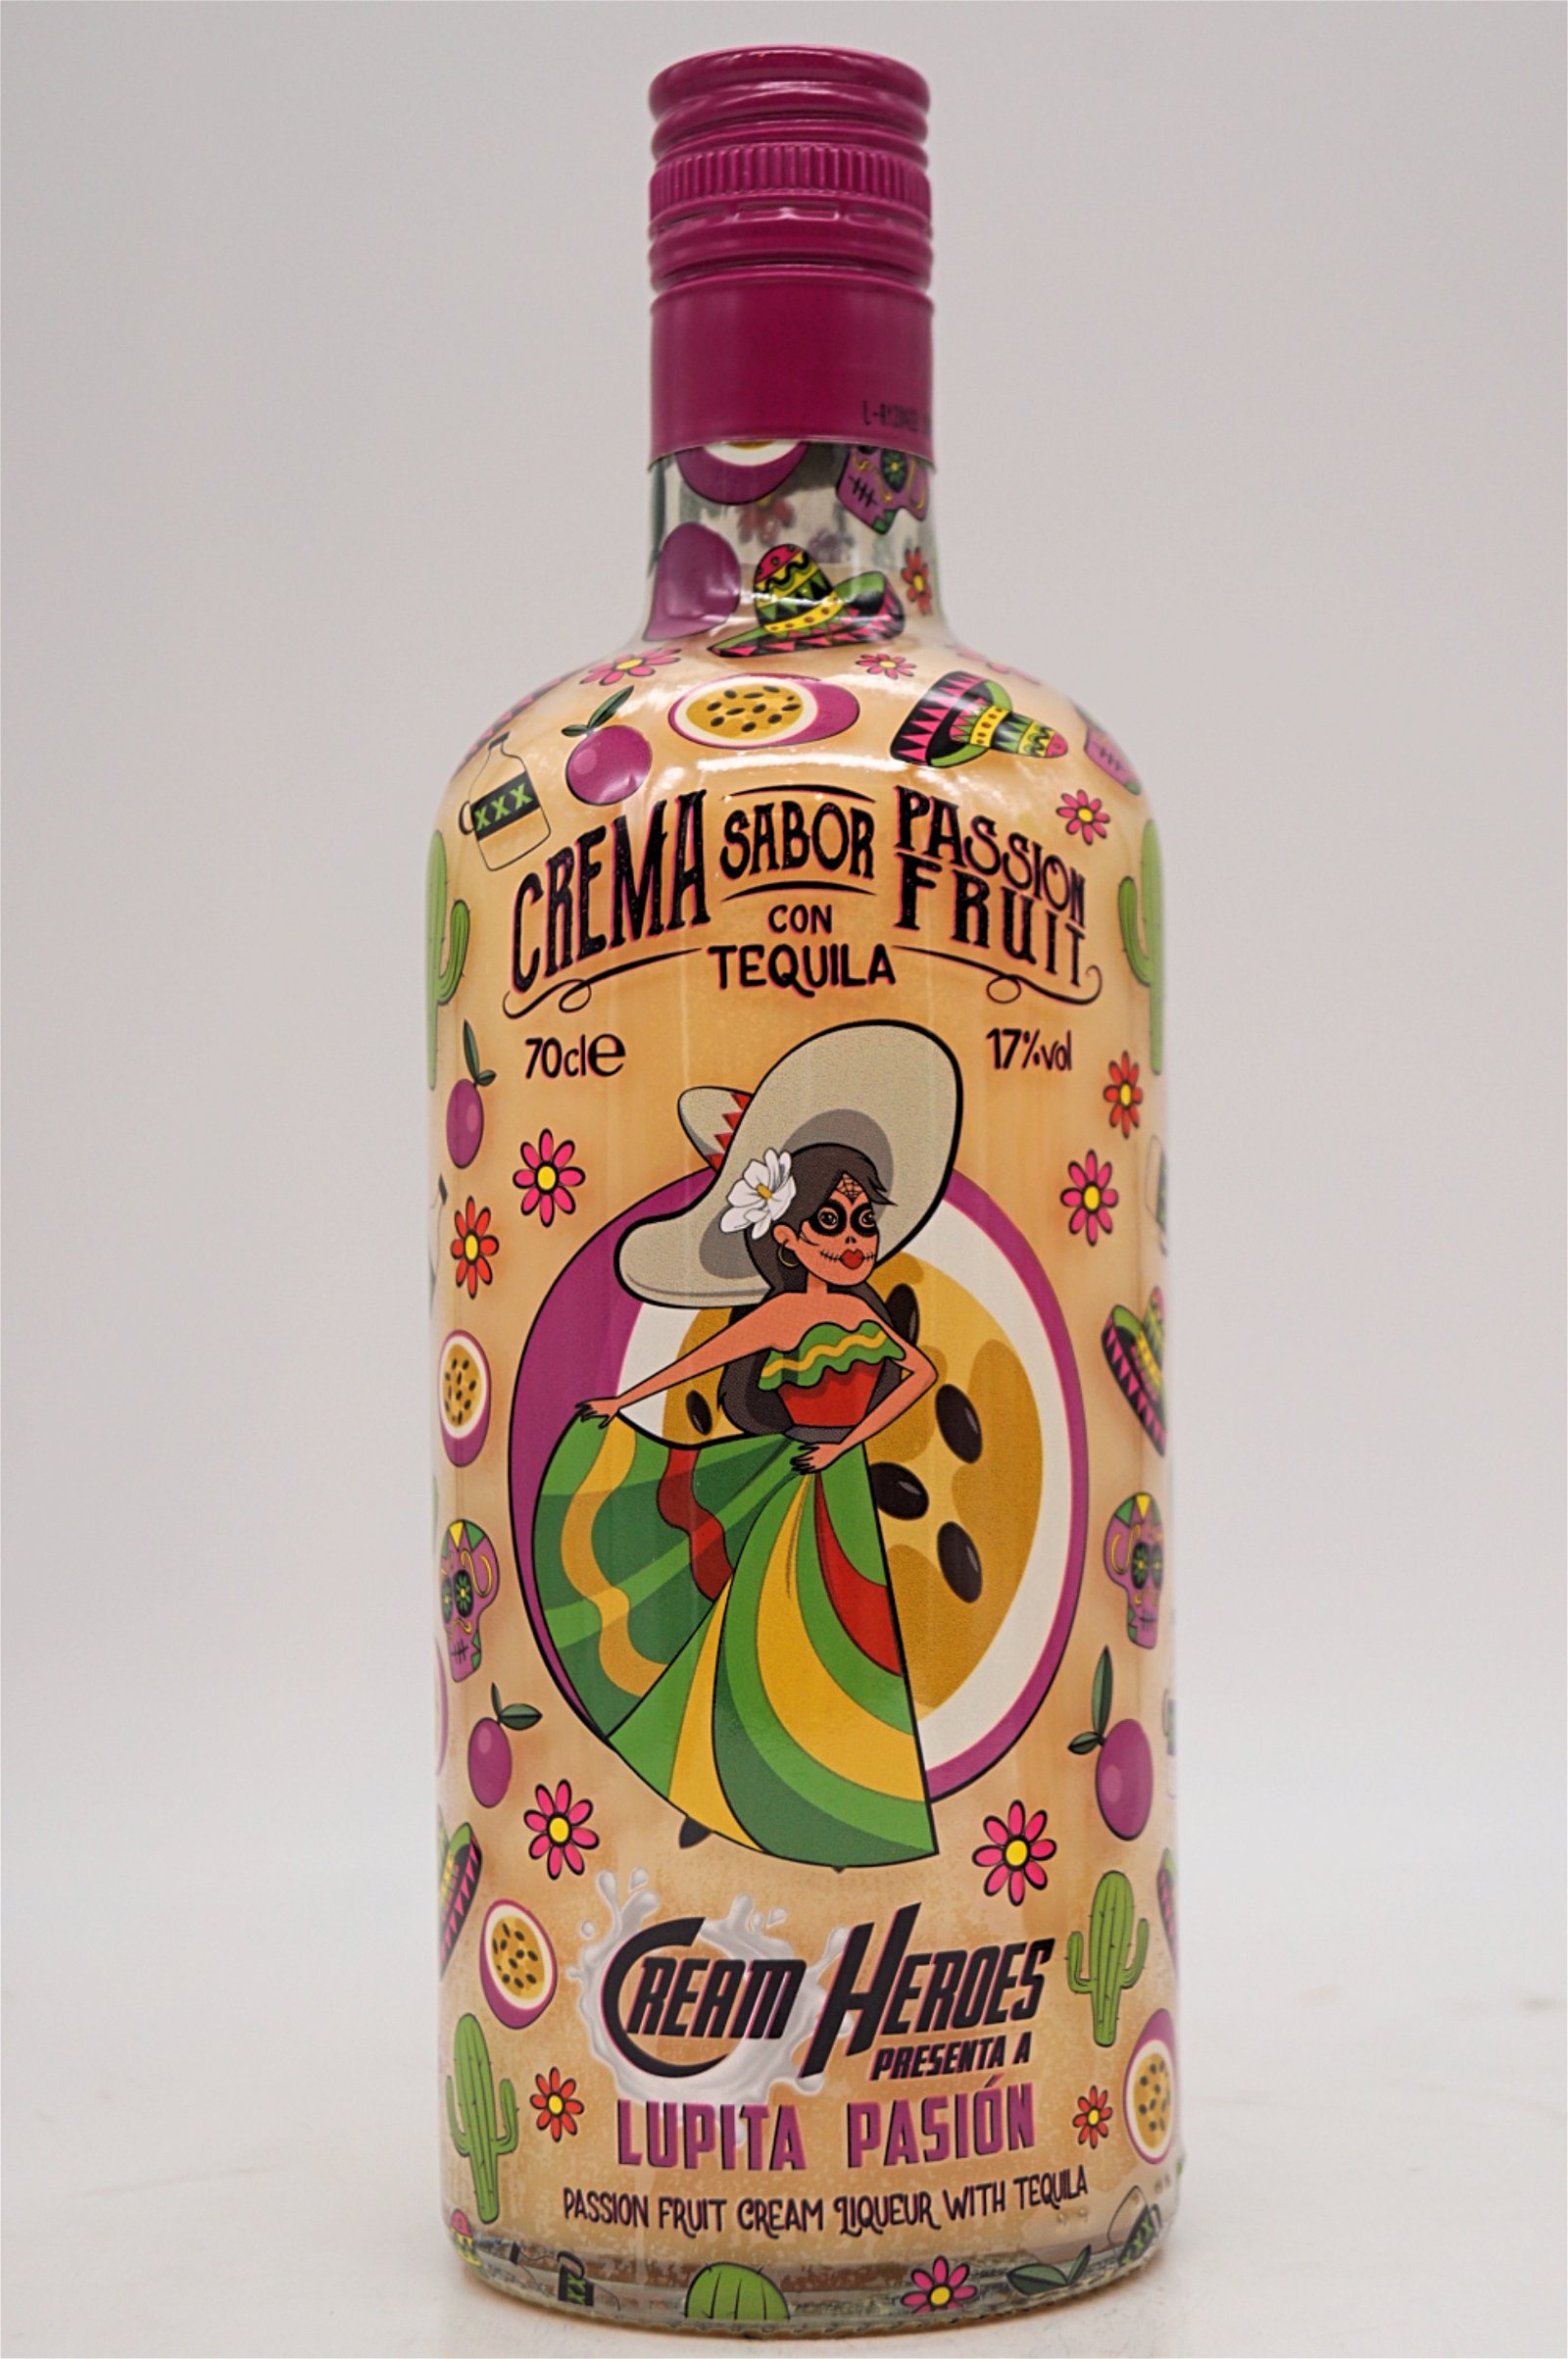 Cream Heroes Tequila Passionsfrucht Likör 